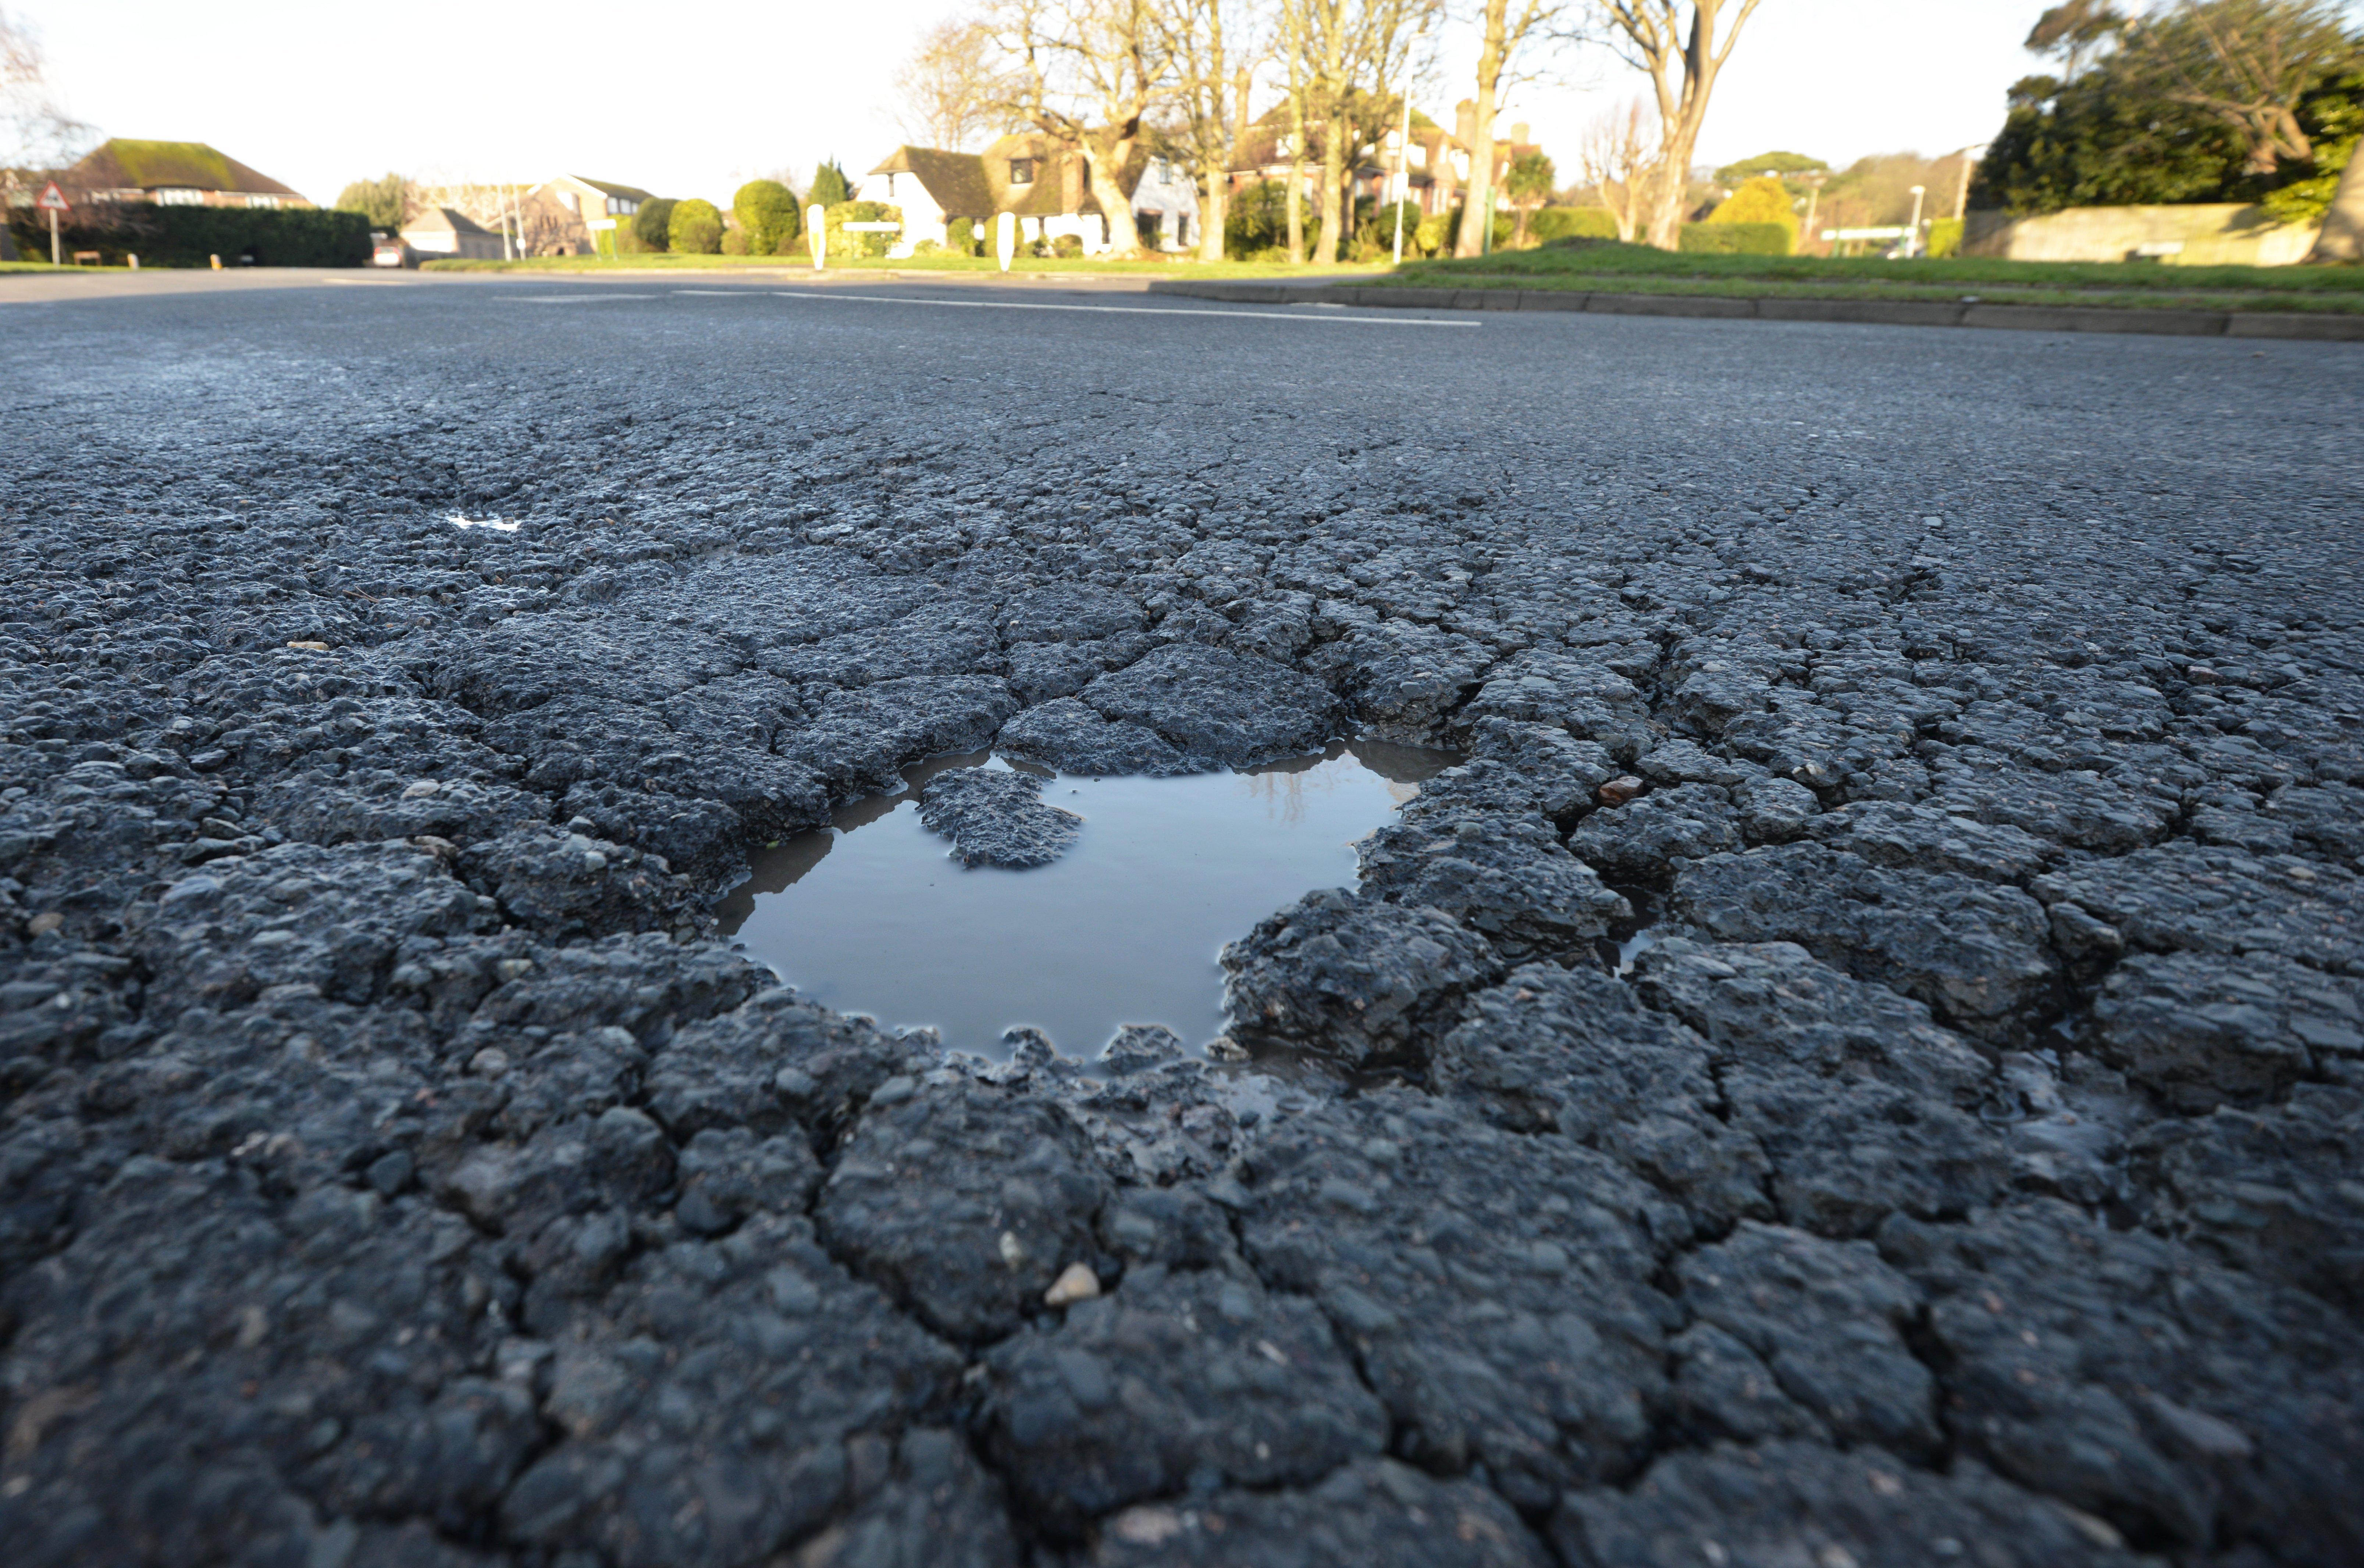 Potholes in Bexhill: Birkdale SUS-200128-104006001